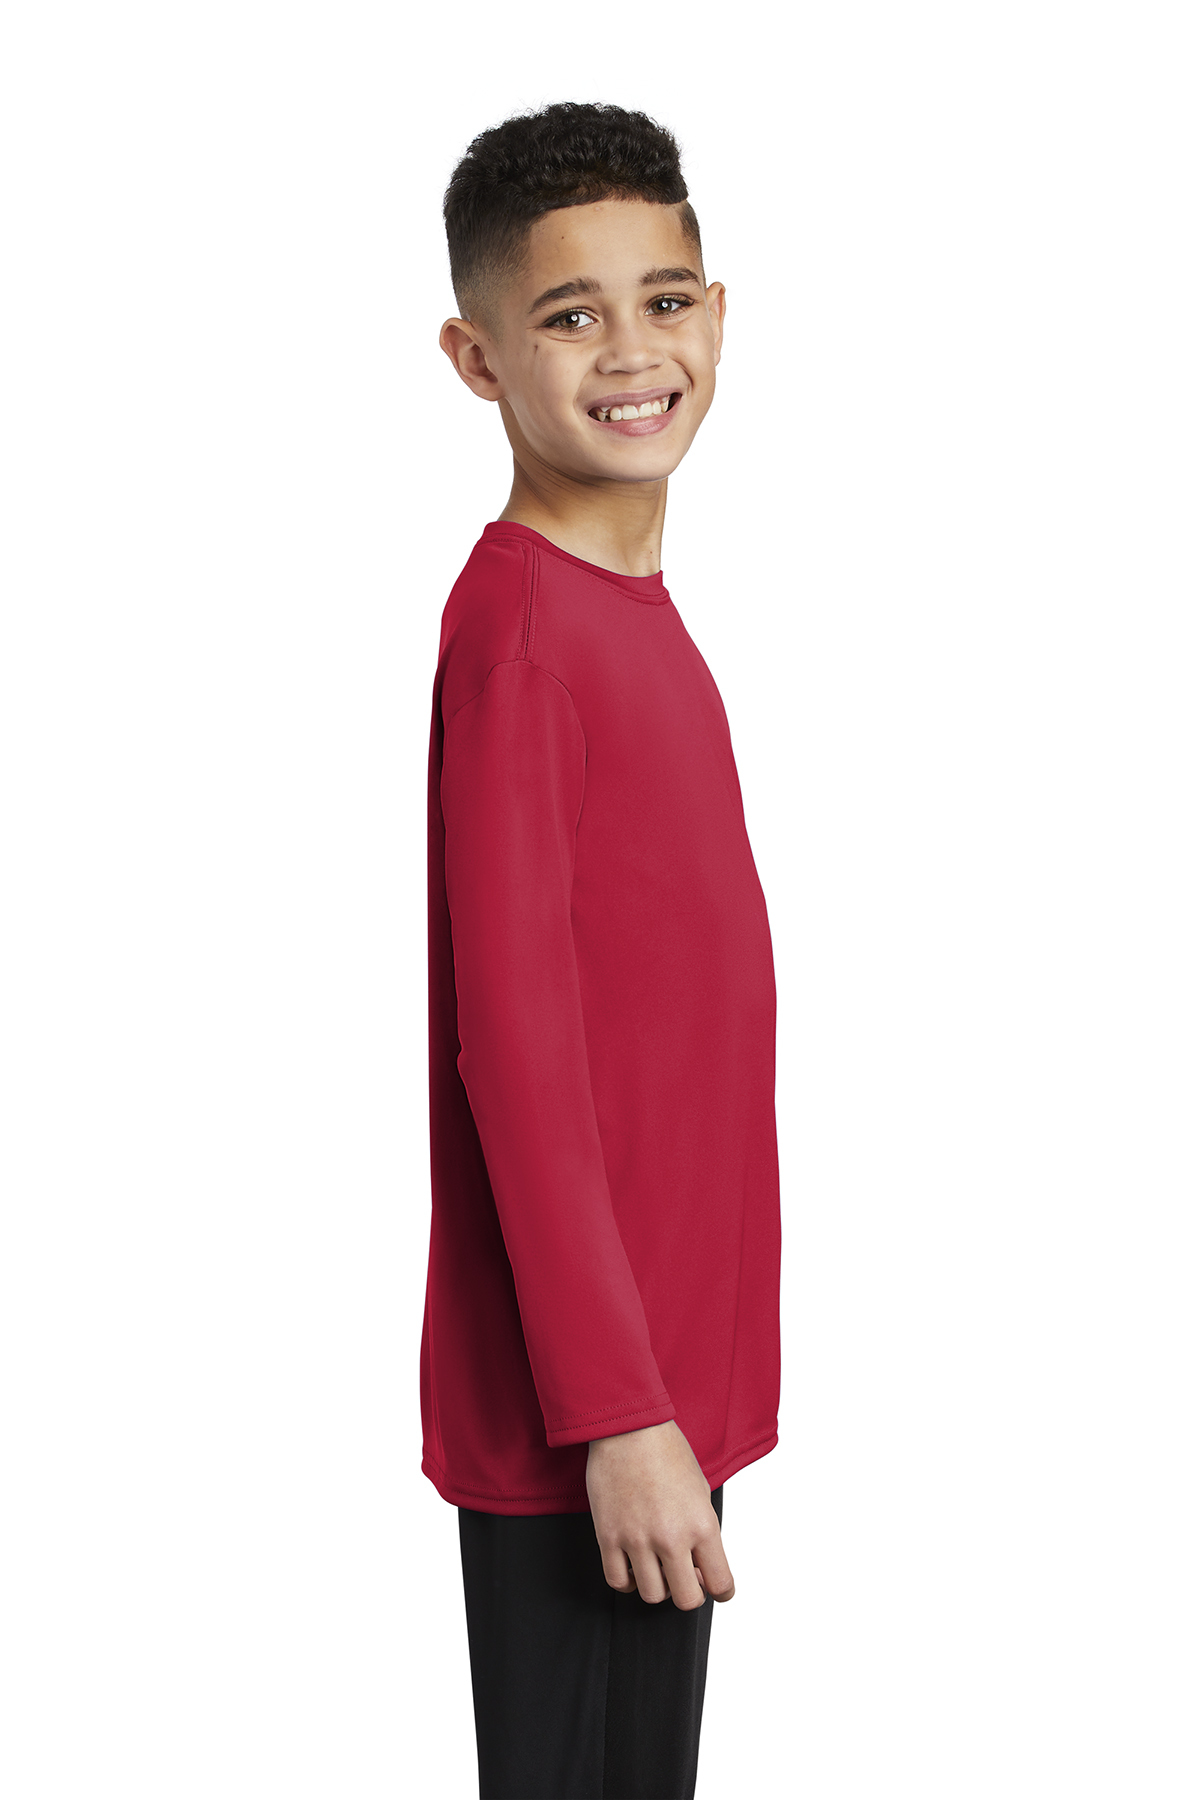 Port & Company Youth Long Sleeve Performance Tee | Product | Port